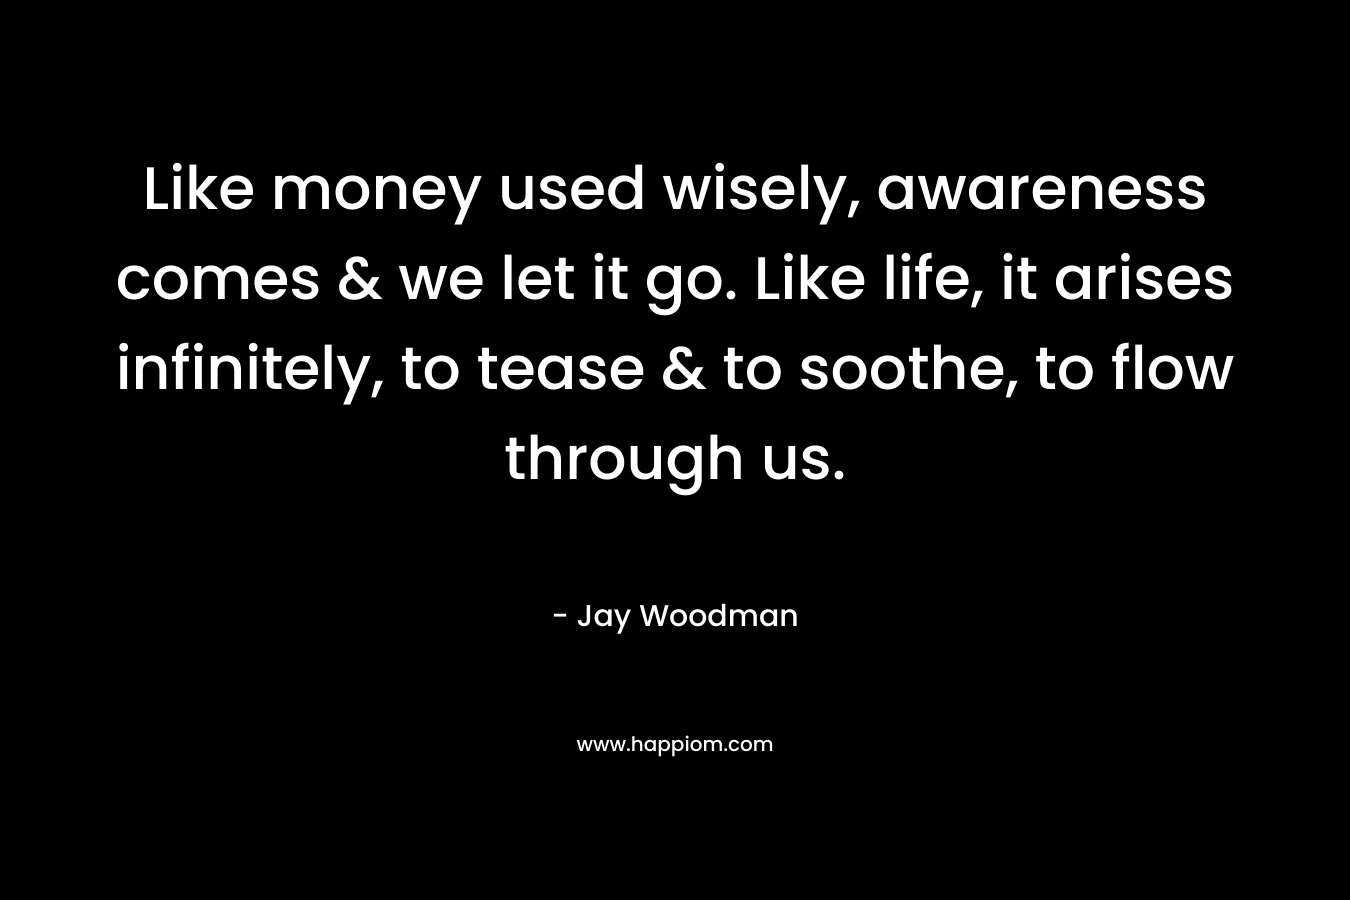 Like money used wisely, awareness comes & we let it go. Like life, it arises infinitely, to tease & to soothe, to flow through us. – Jay Woodman